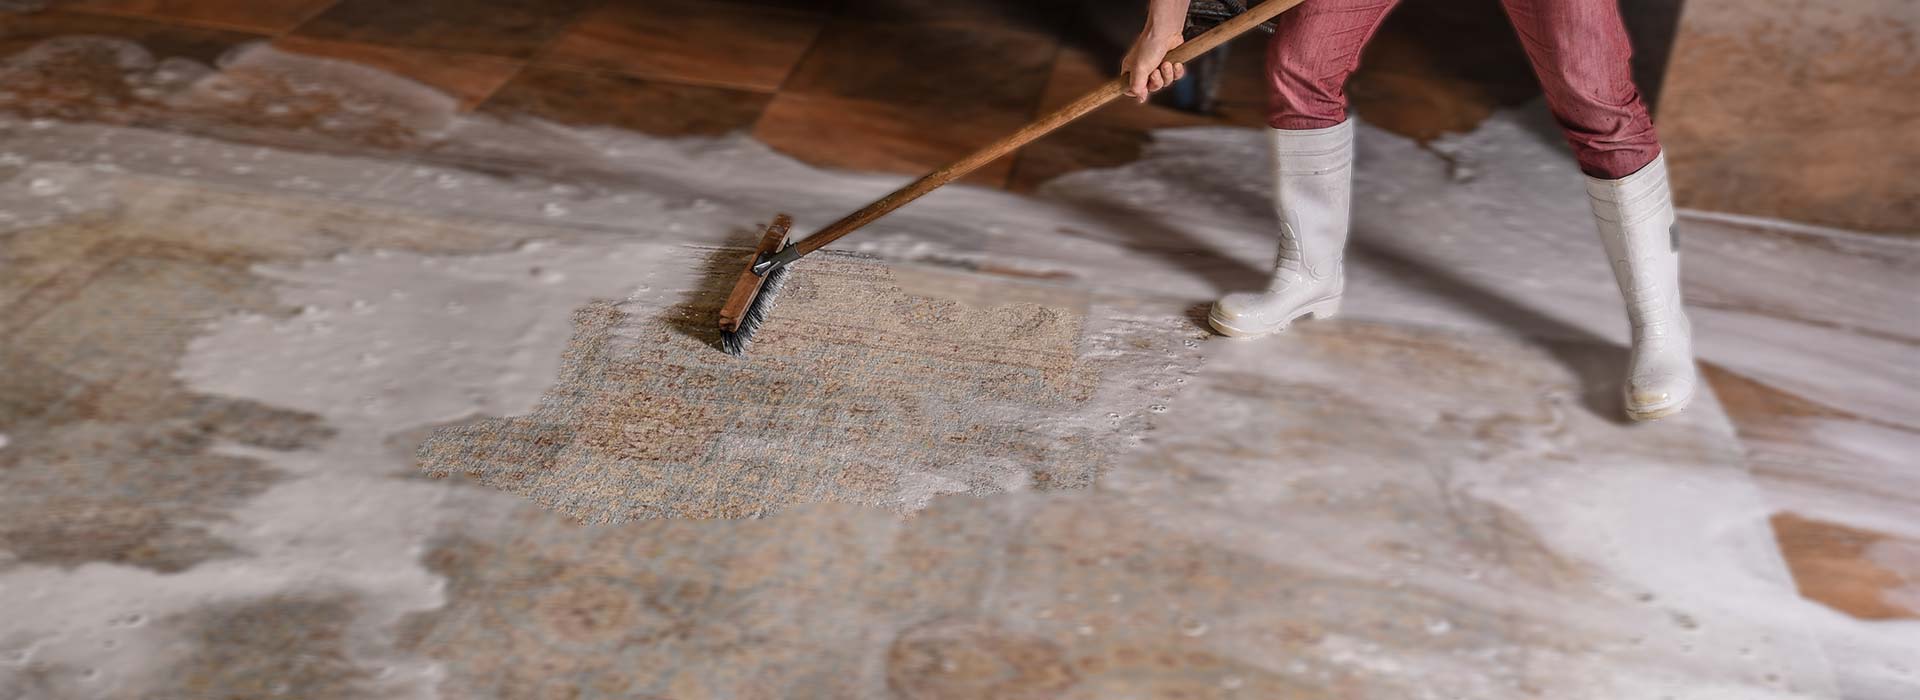 Carpet Cleaning Carpets Clinic